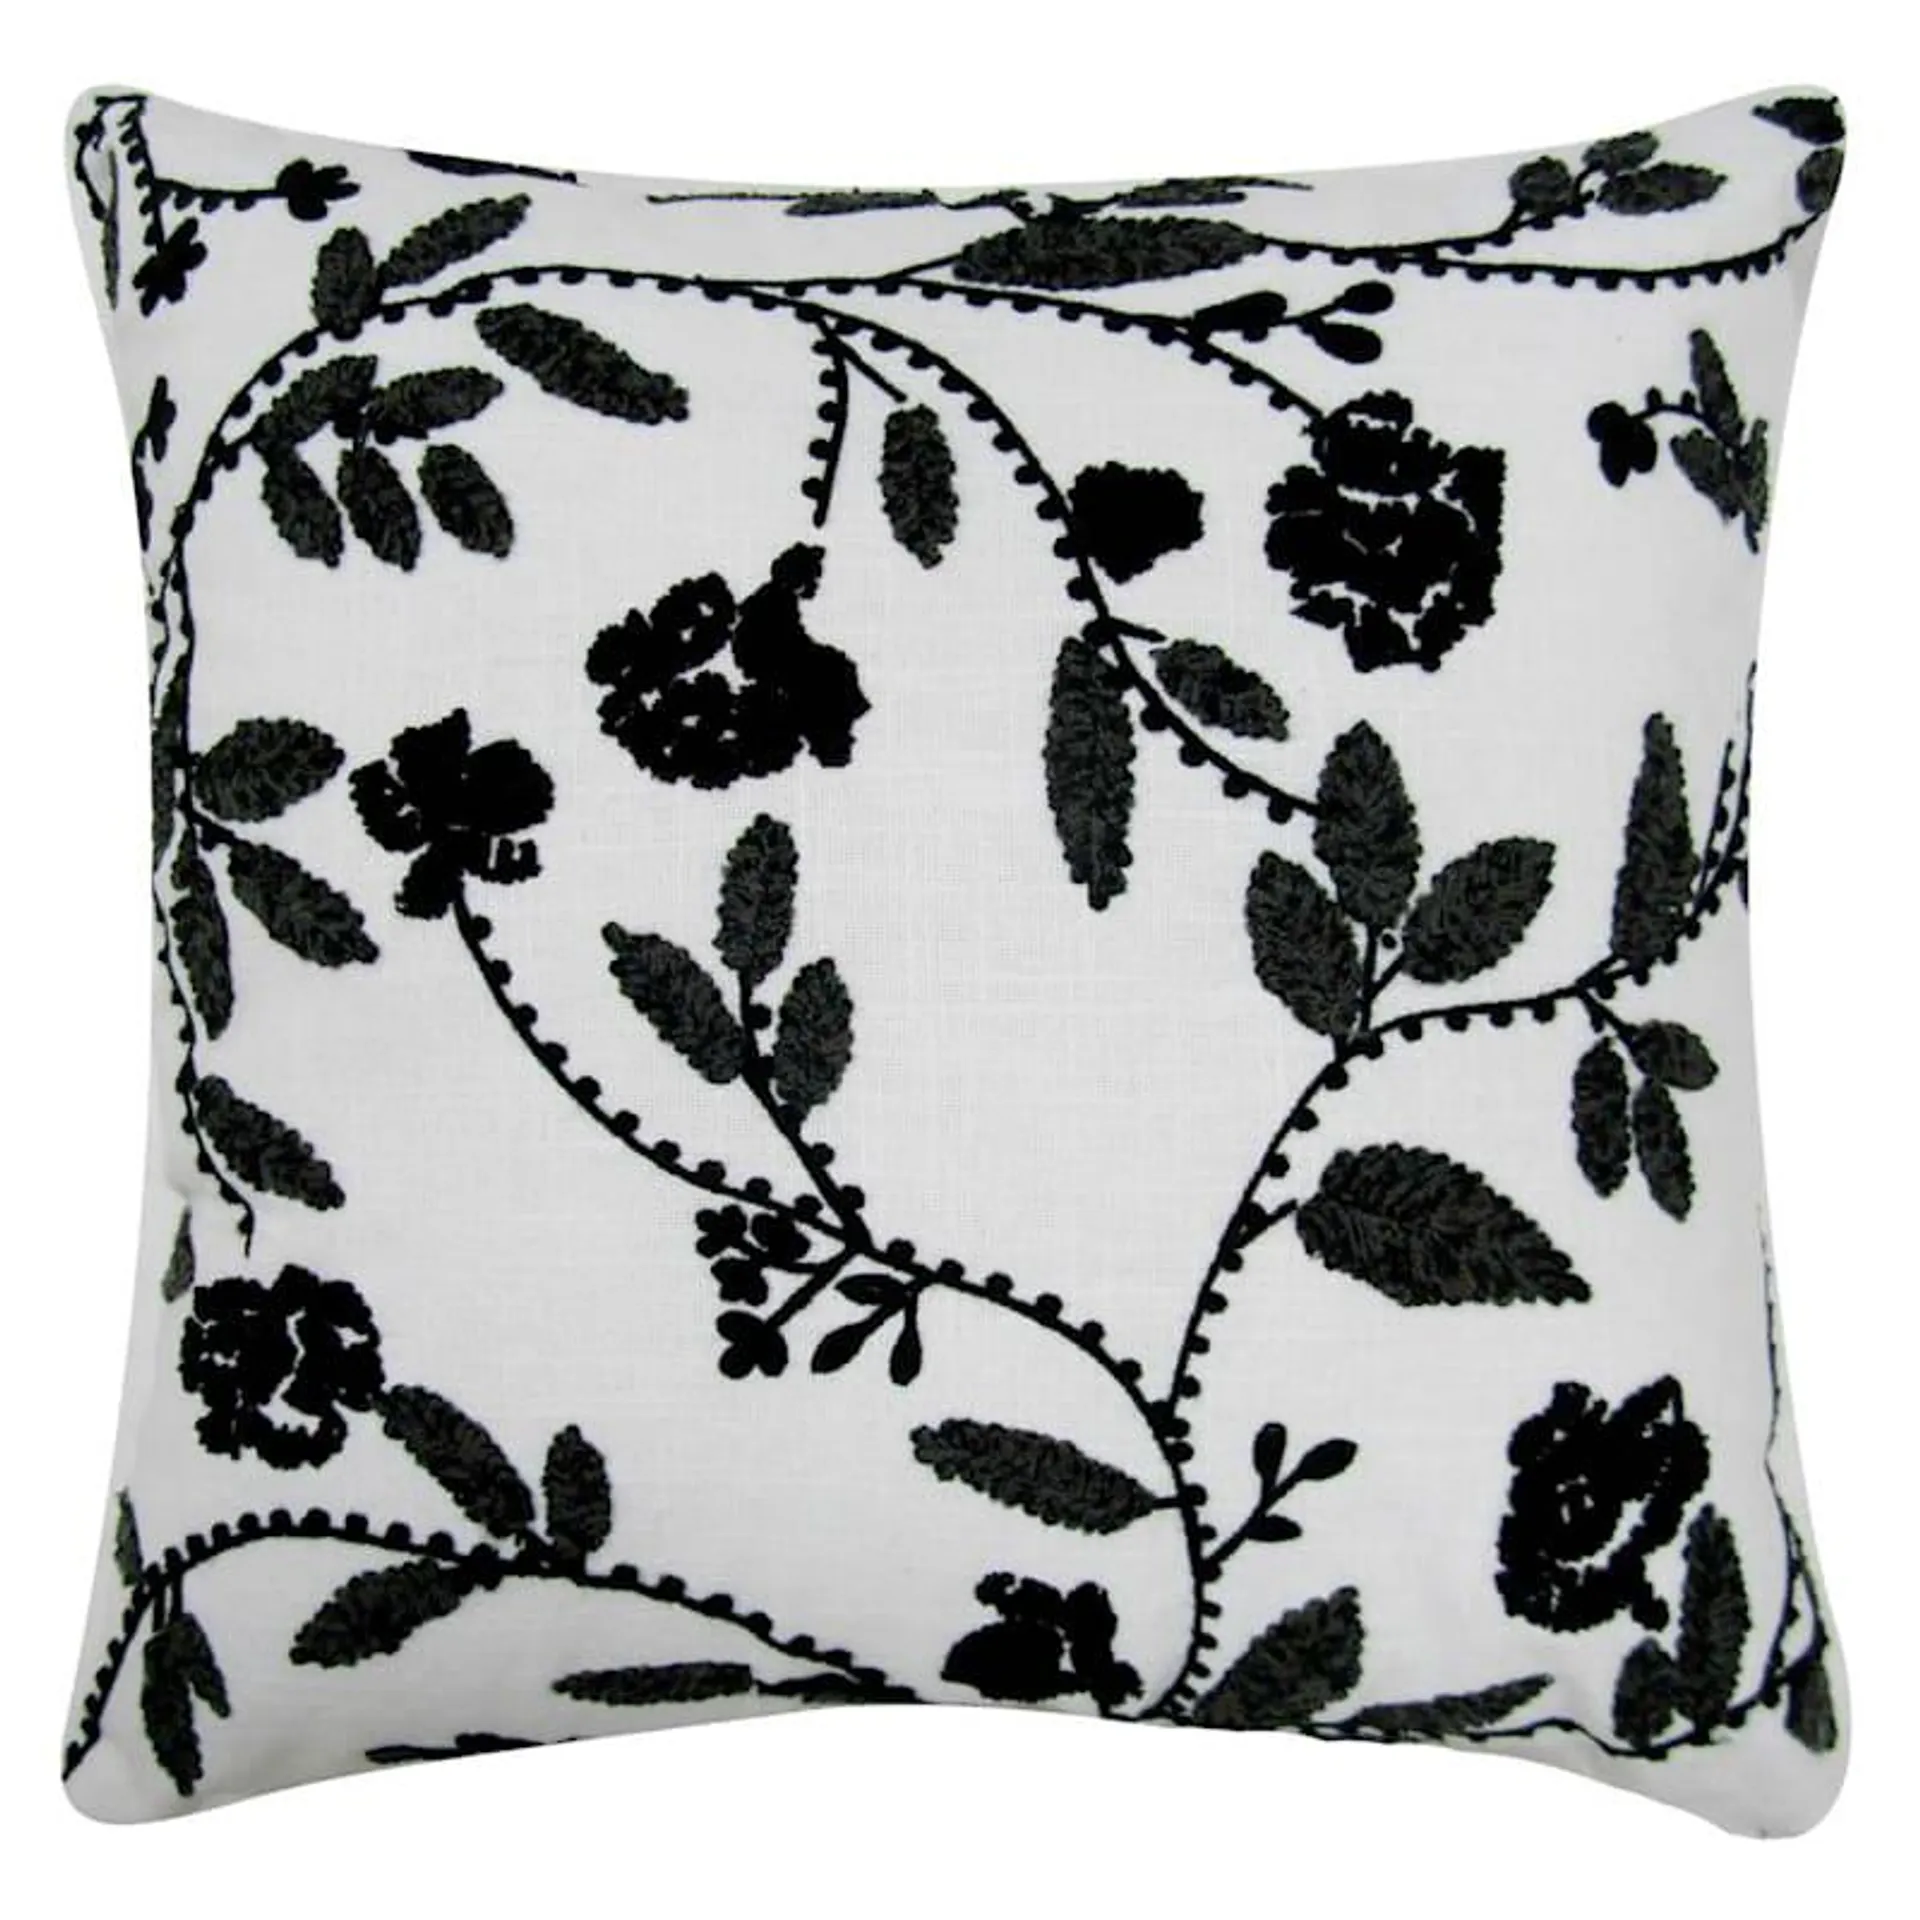 White & Black Floral Embroidered Throw Pillow, 18"